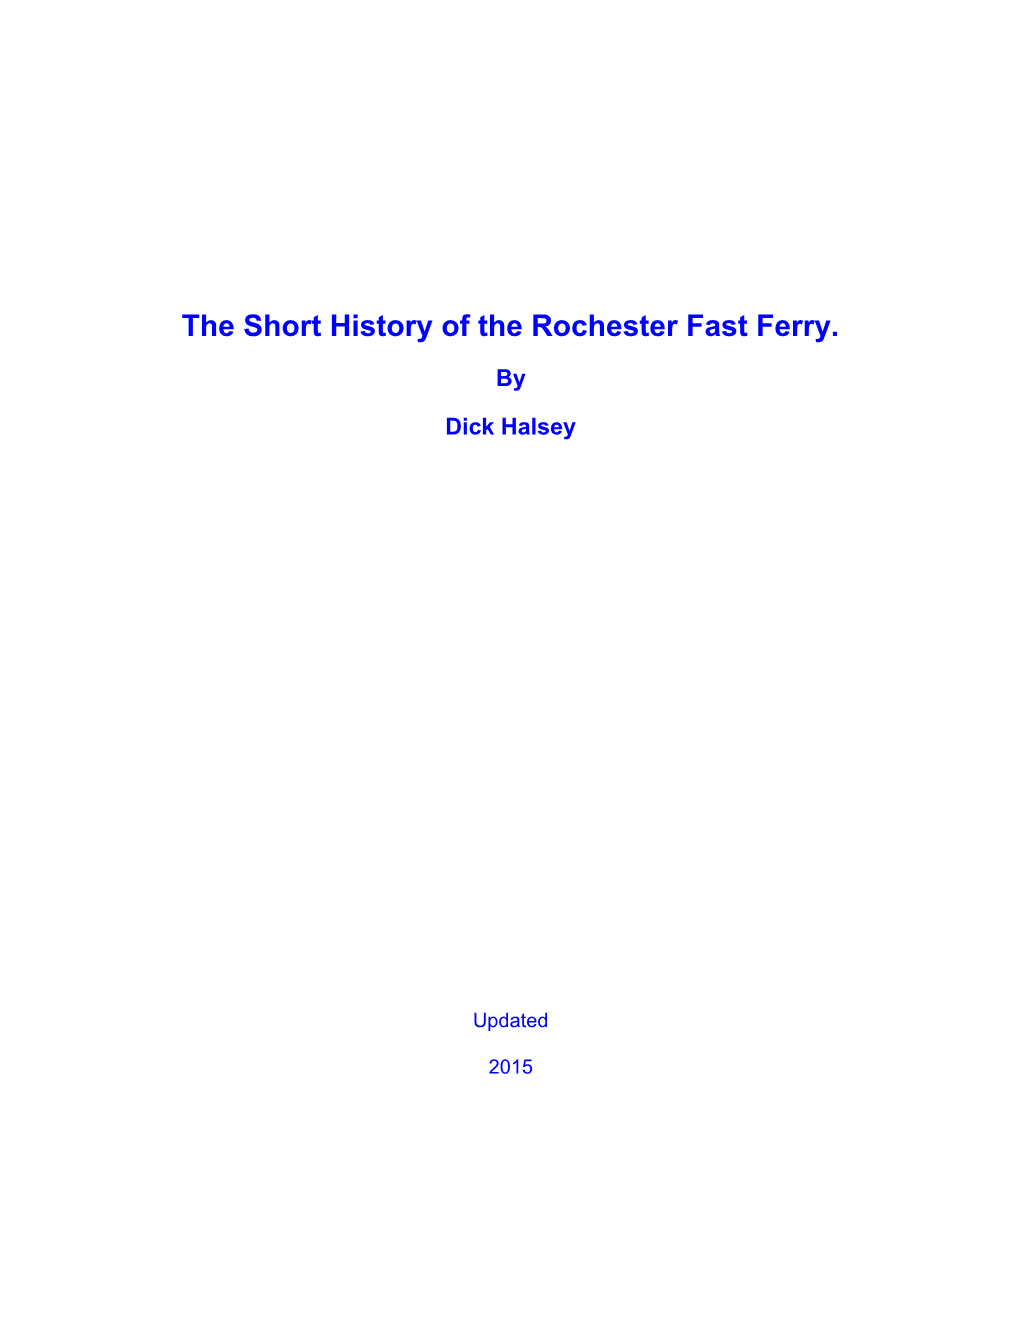 The Short History of the Rochester Fast Ferry